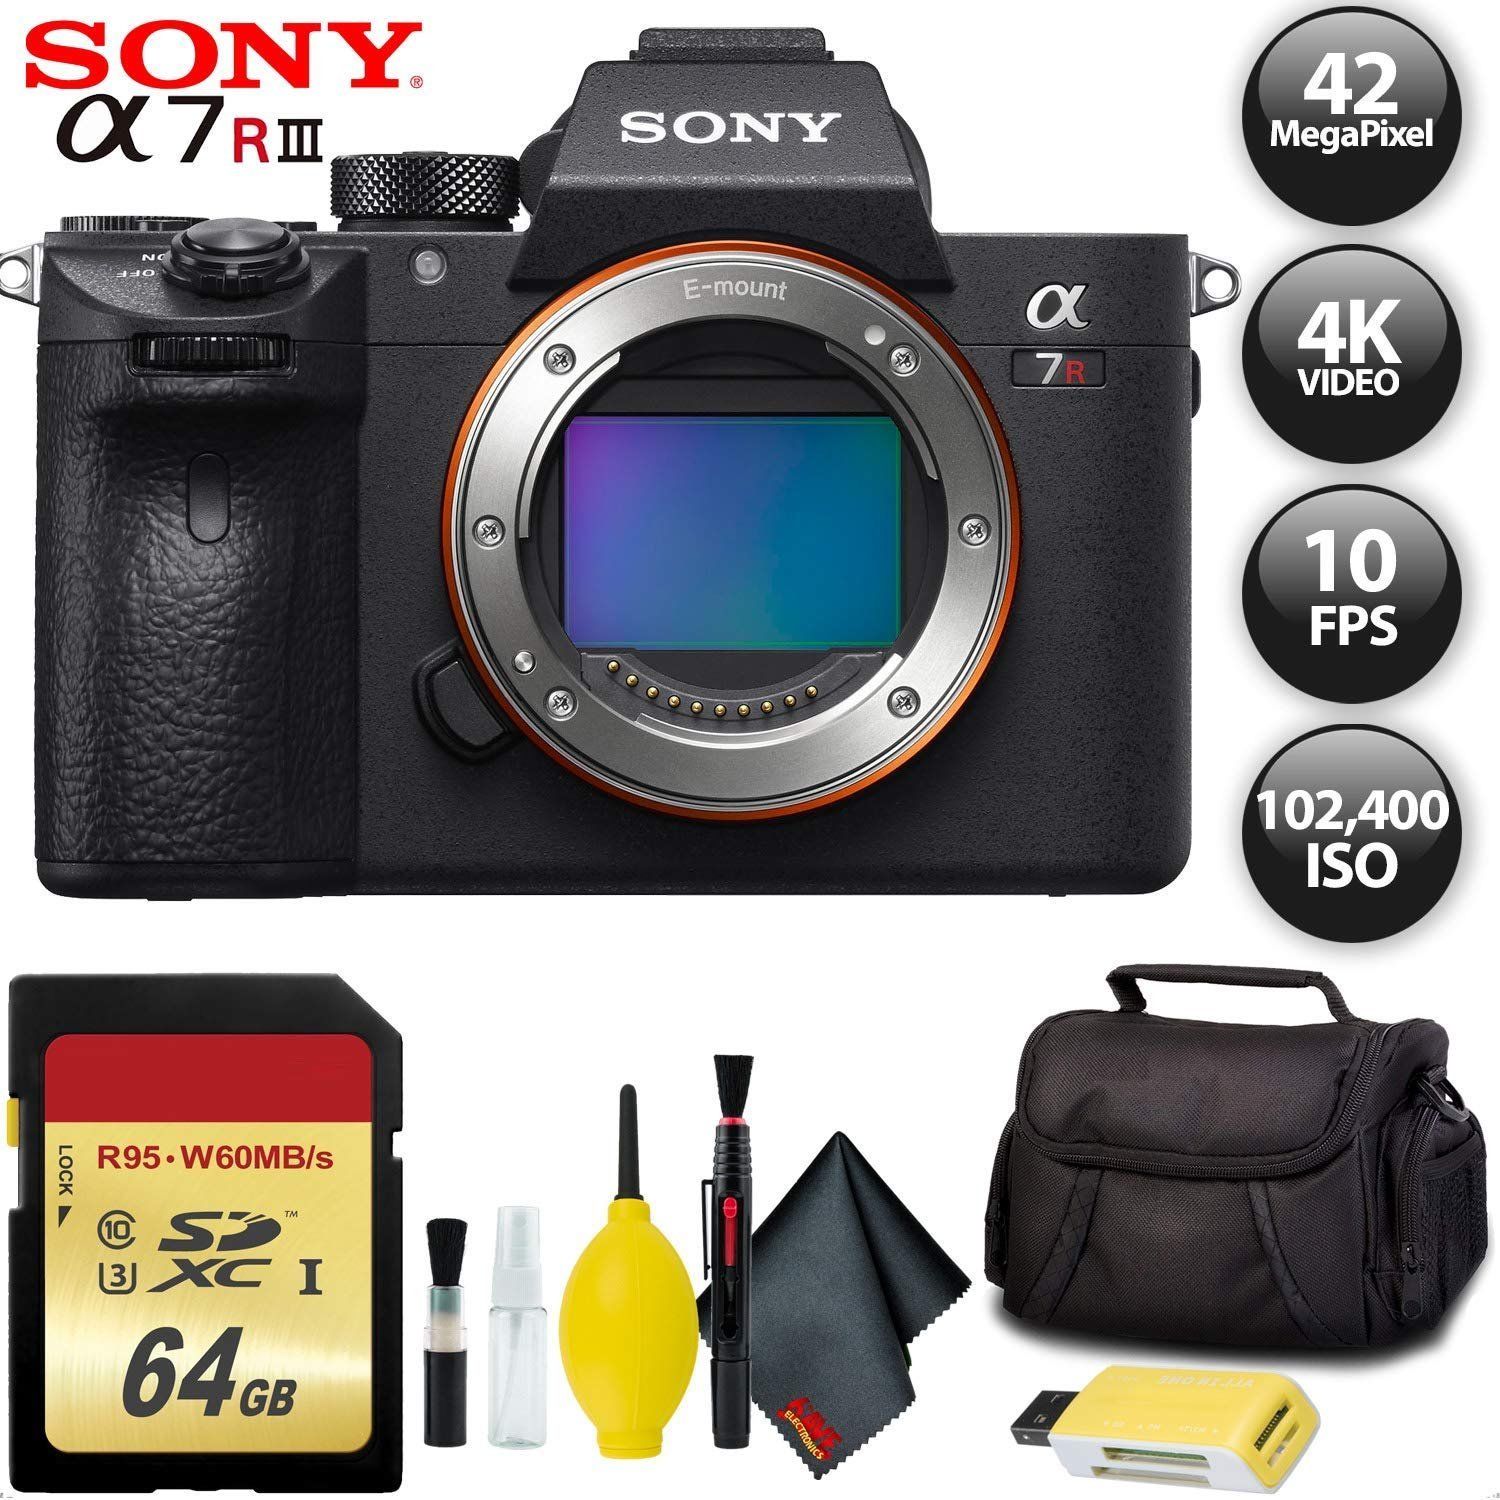 Sony Alpha a7R III Mirrorless Digital Camera + 128GB Memory Card Base Kit with Accessories